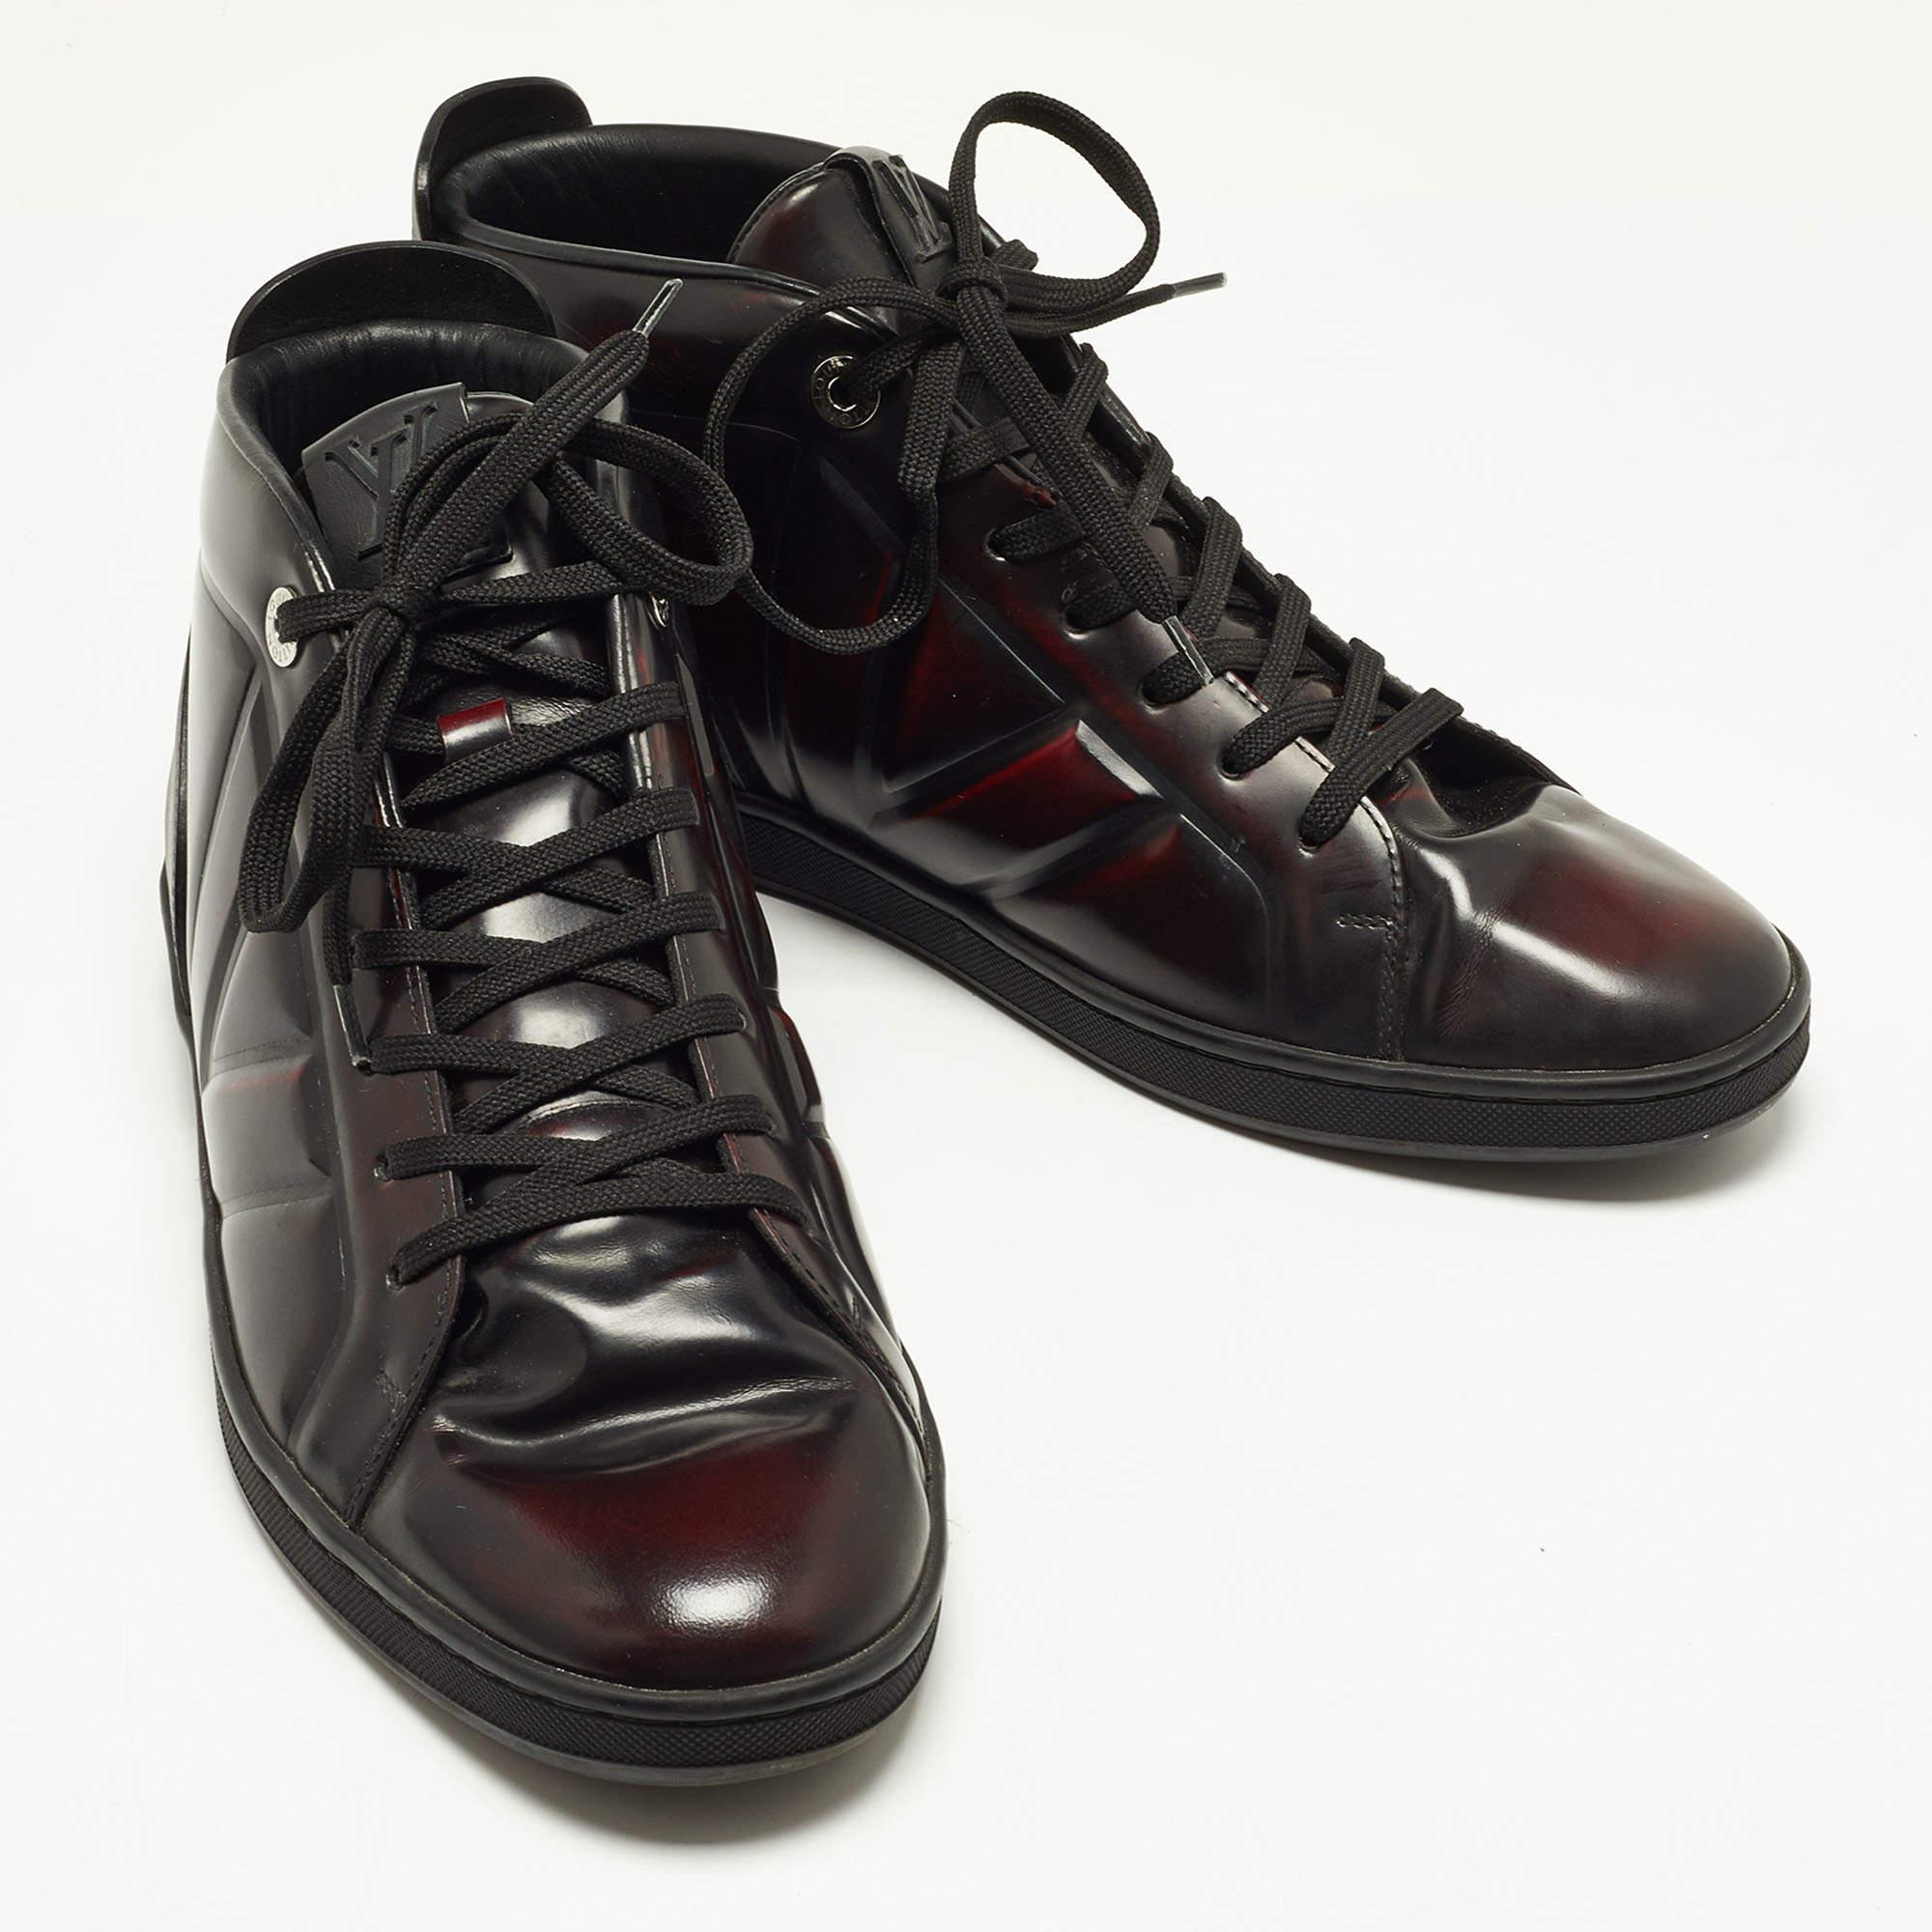 Louis Vuitton Two Tone Leather High Top Sneakers Size 42 In Good Condition For Sale In Dubai, Al Qouz 2